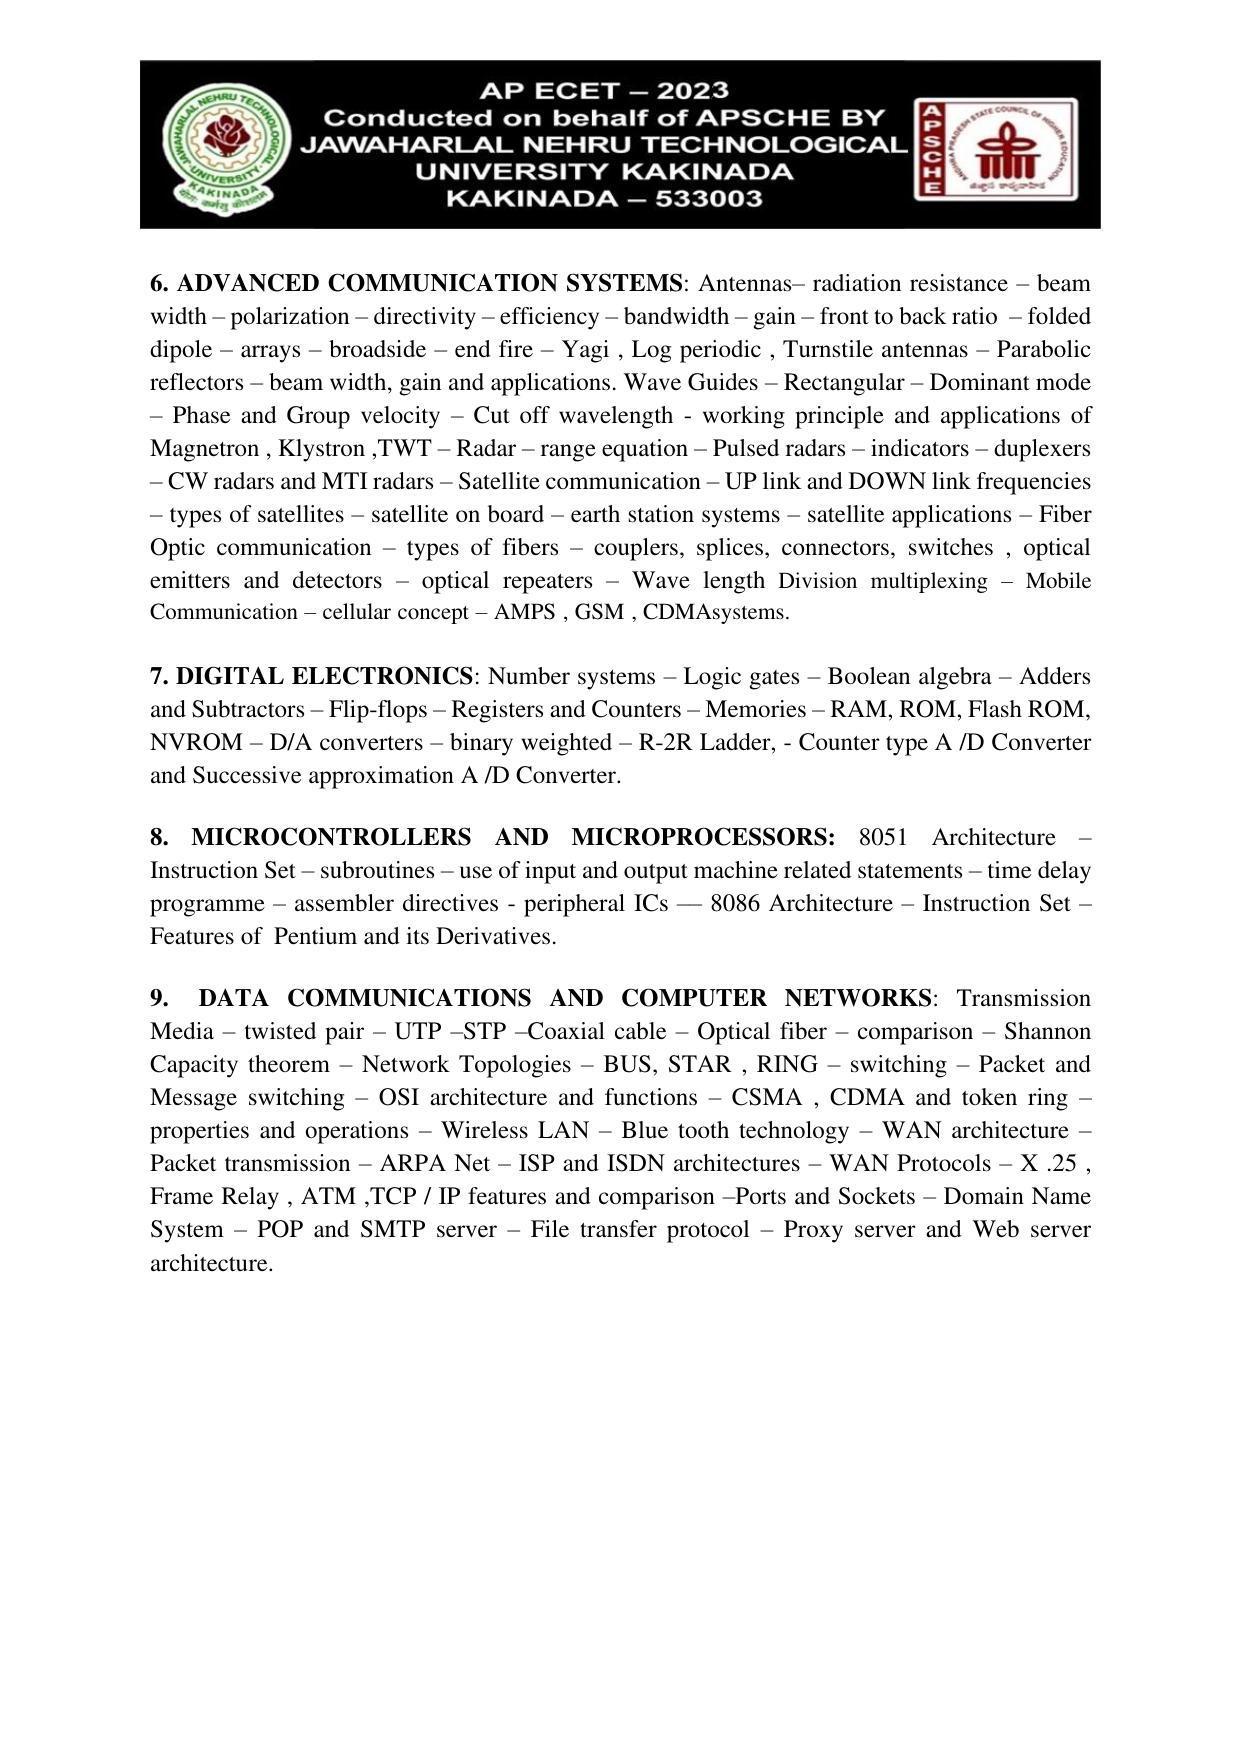 AP ECET ELECTRONICS AND COMMUNICATION ENGINEERING Syllabus - Page 2